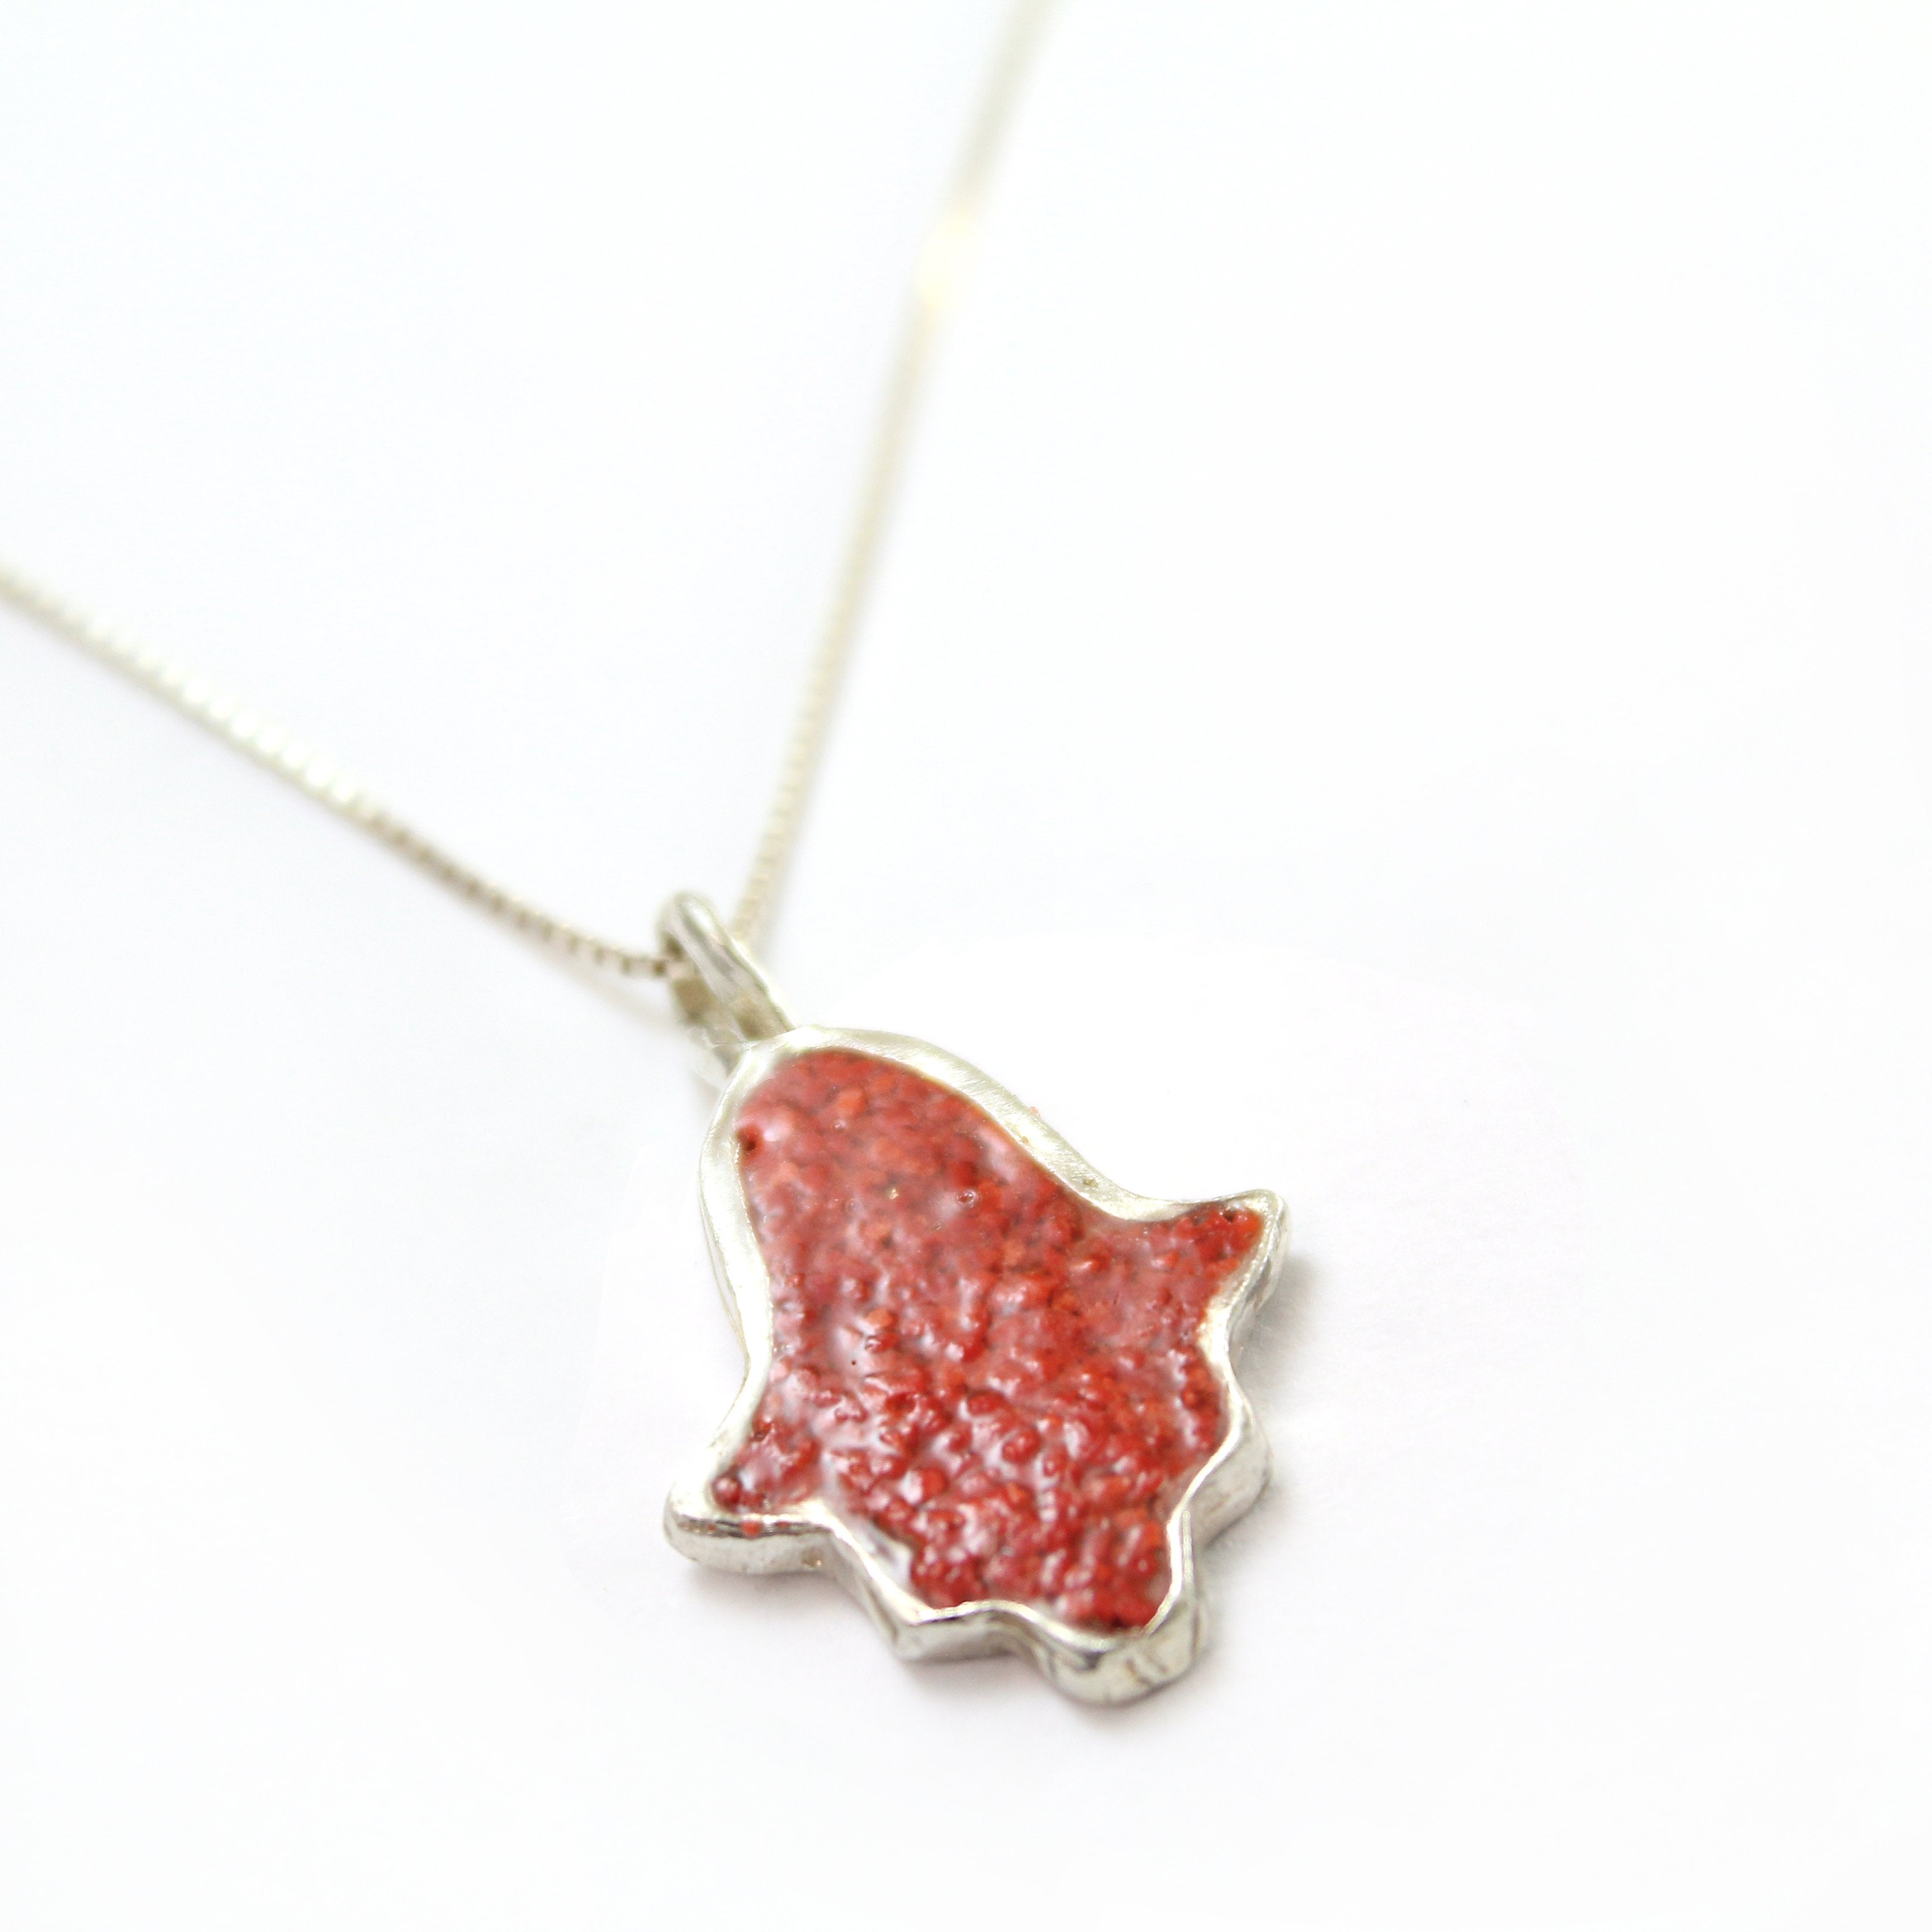 Red Hamsa Necklace with stones - Shulamit Kanter